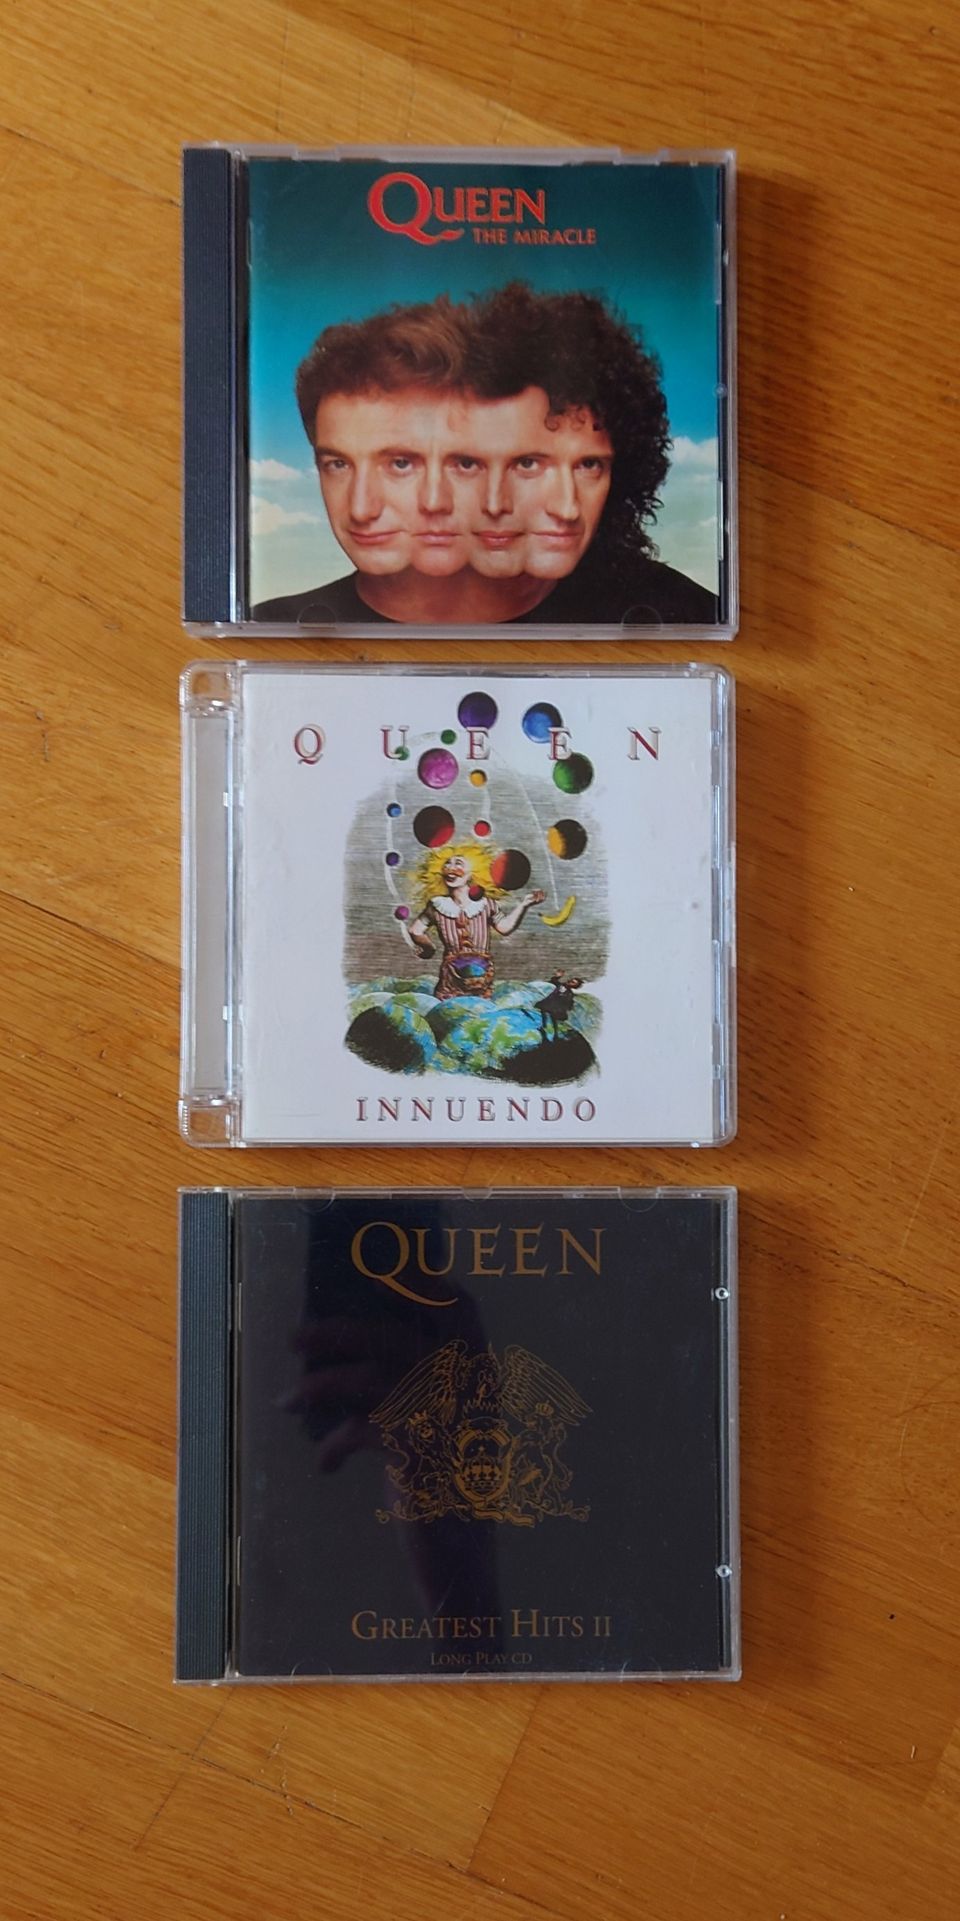 Queen CD Innuendo, The Miracle, Greatest Hits II